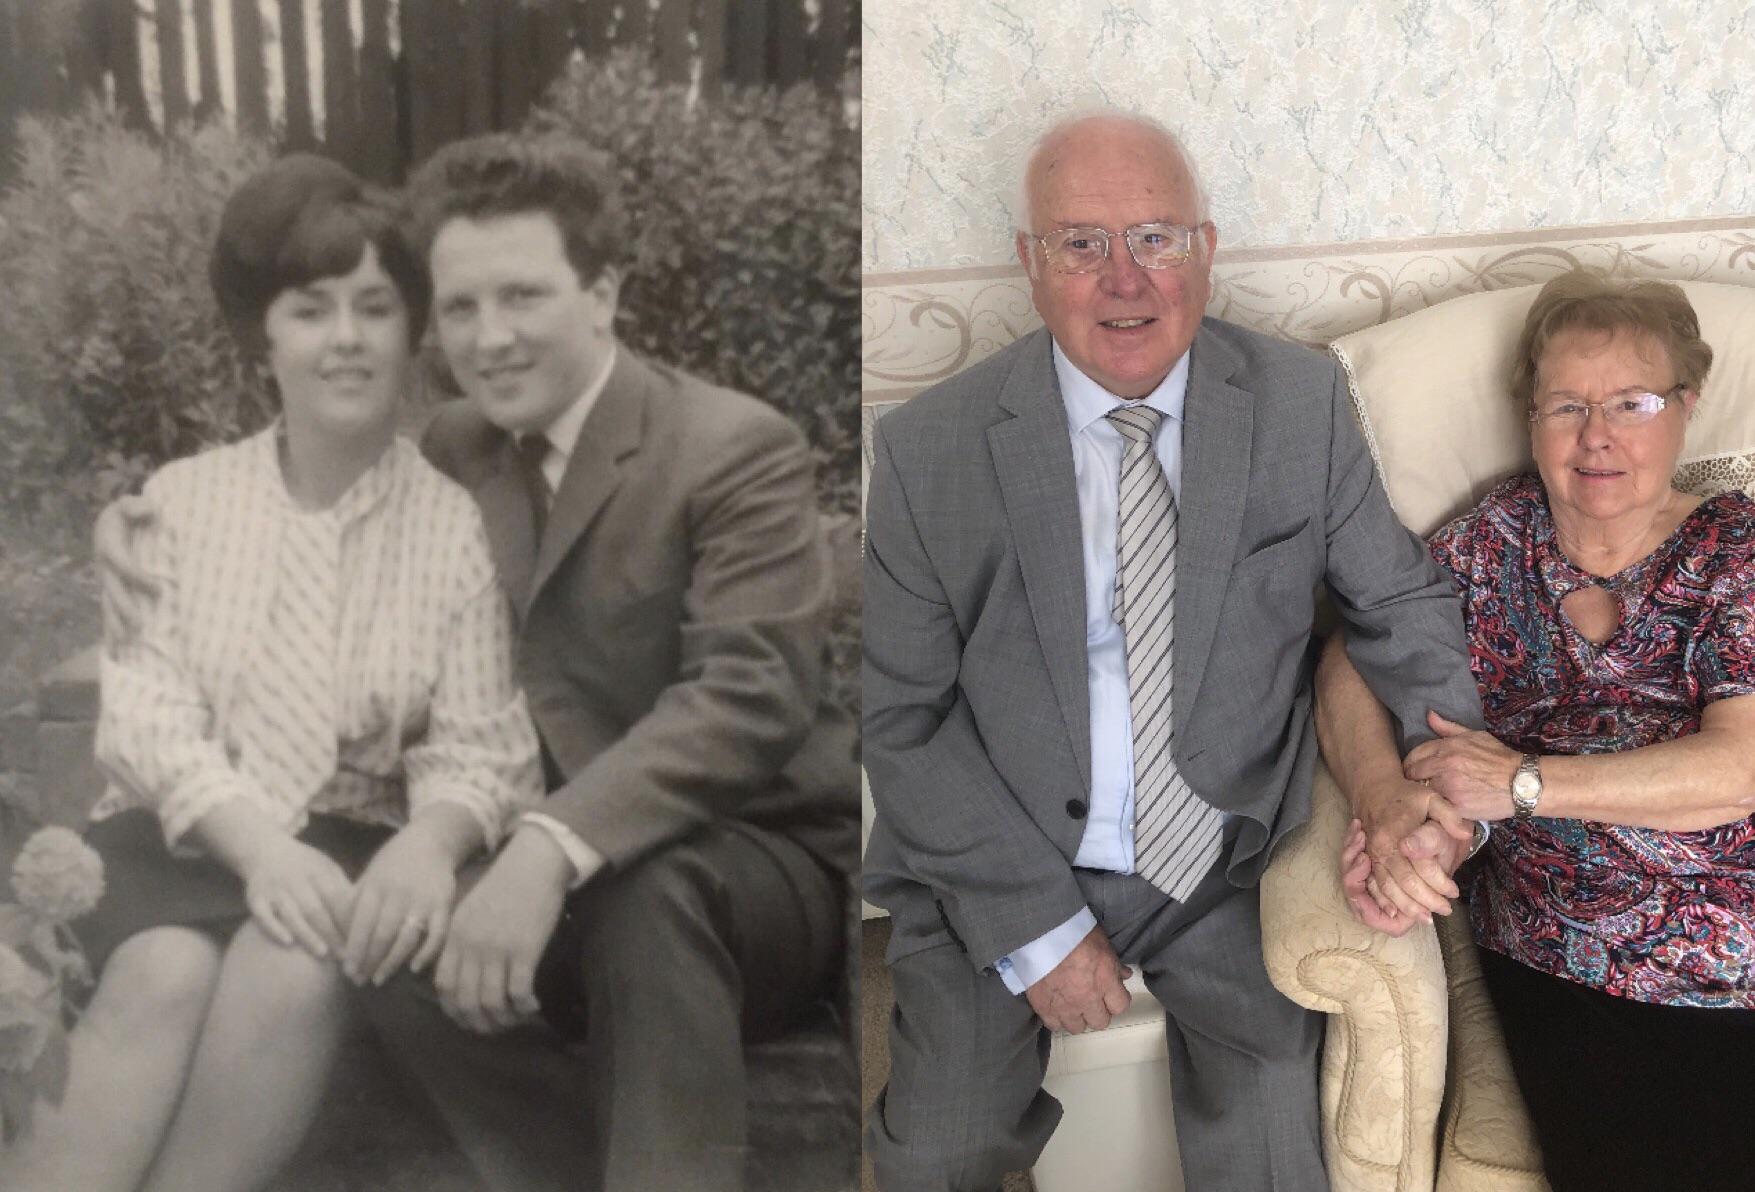 two-photo collage. the first is a black and white photo of a woman and a man in the 1960s who are newly married. they are sitting outside. the second is of that same man and woman, 60 years later in 2020. they are holding hands and sitting inside.